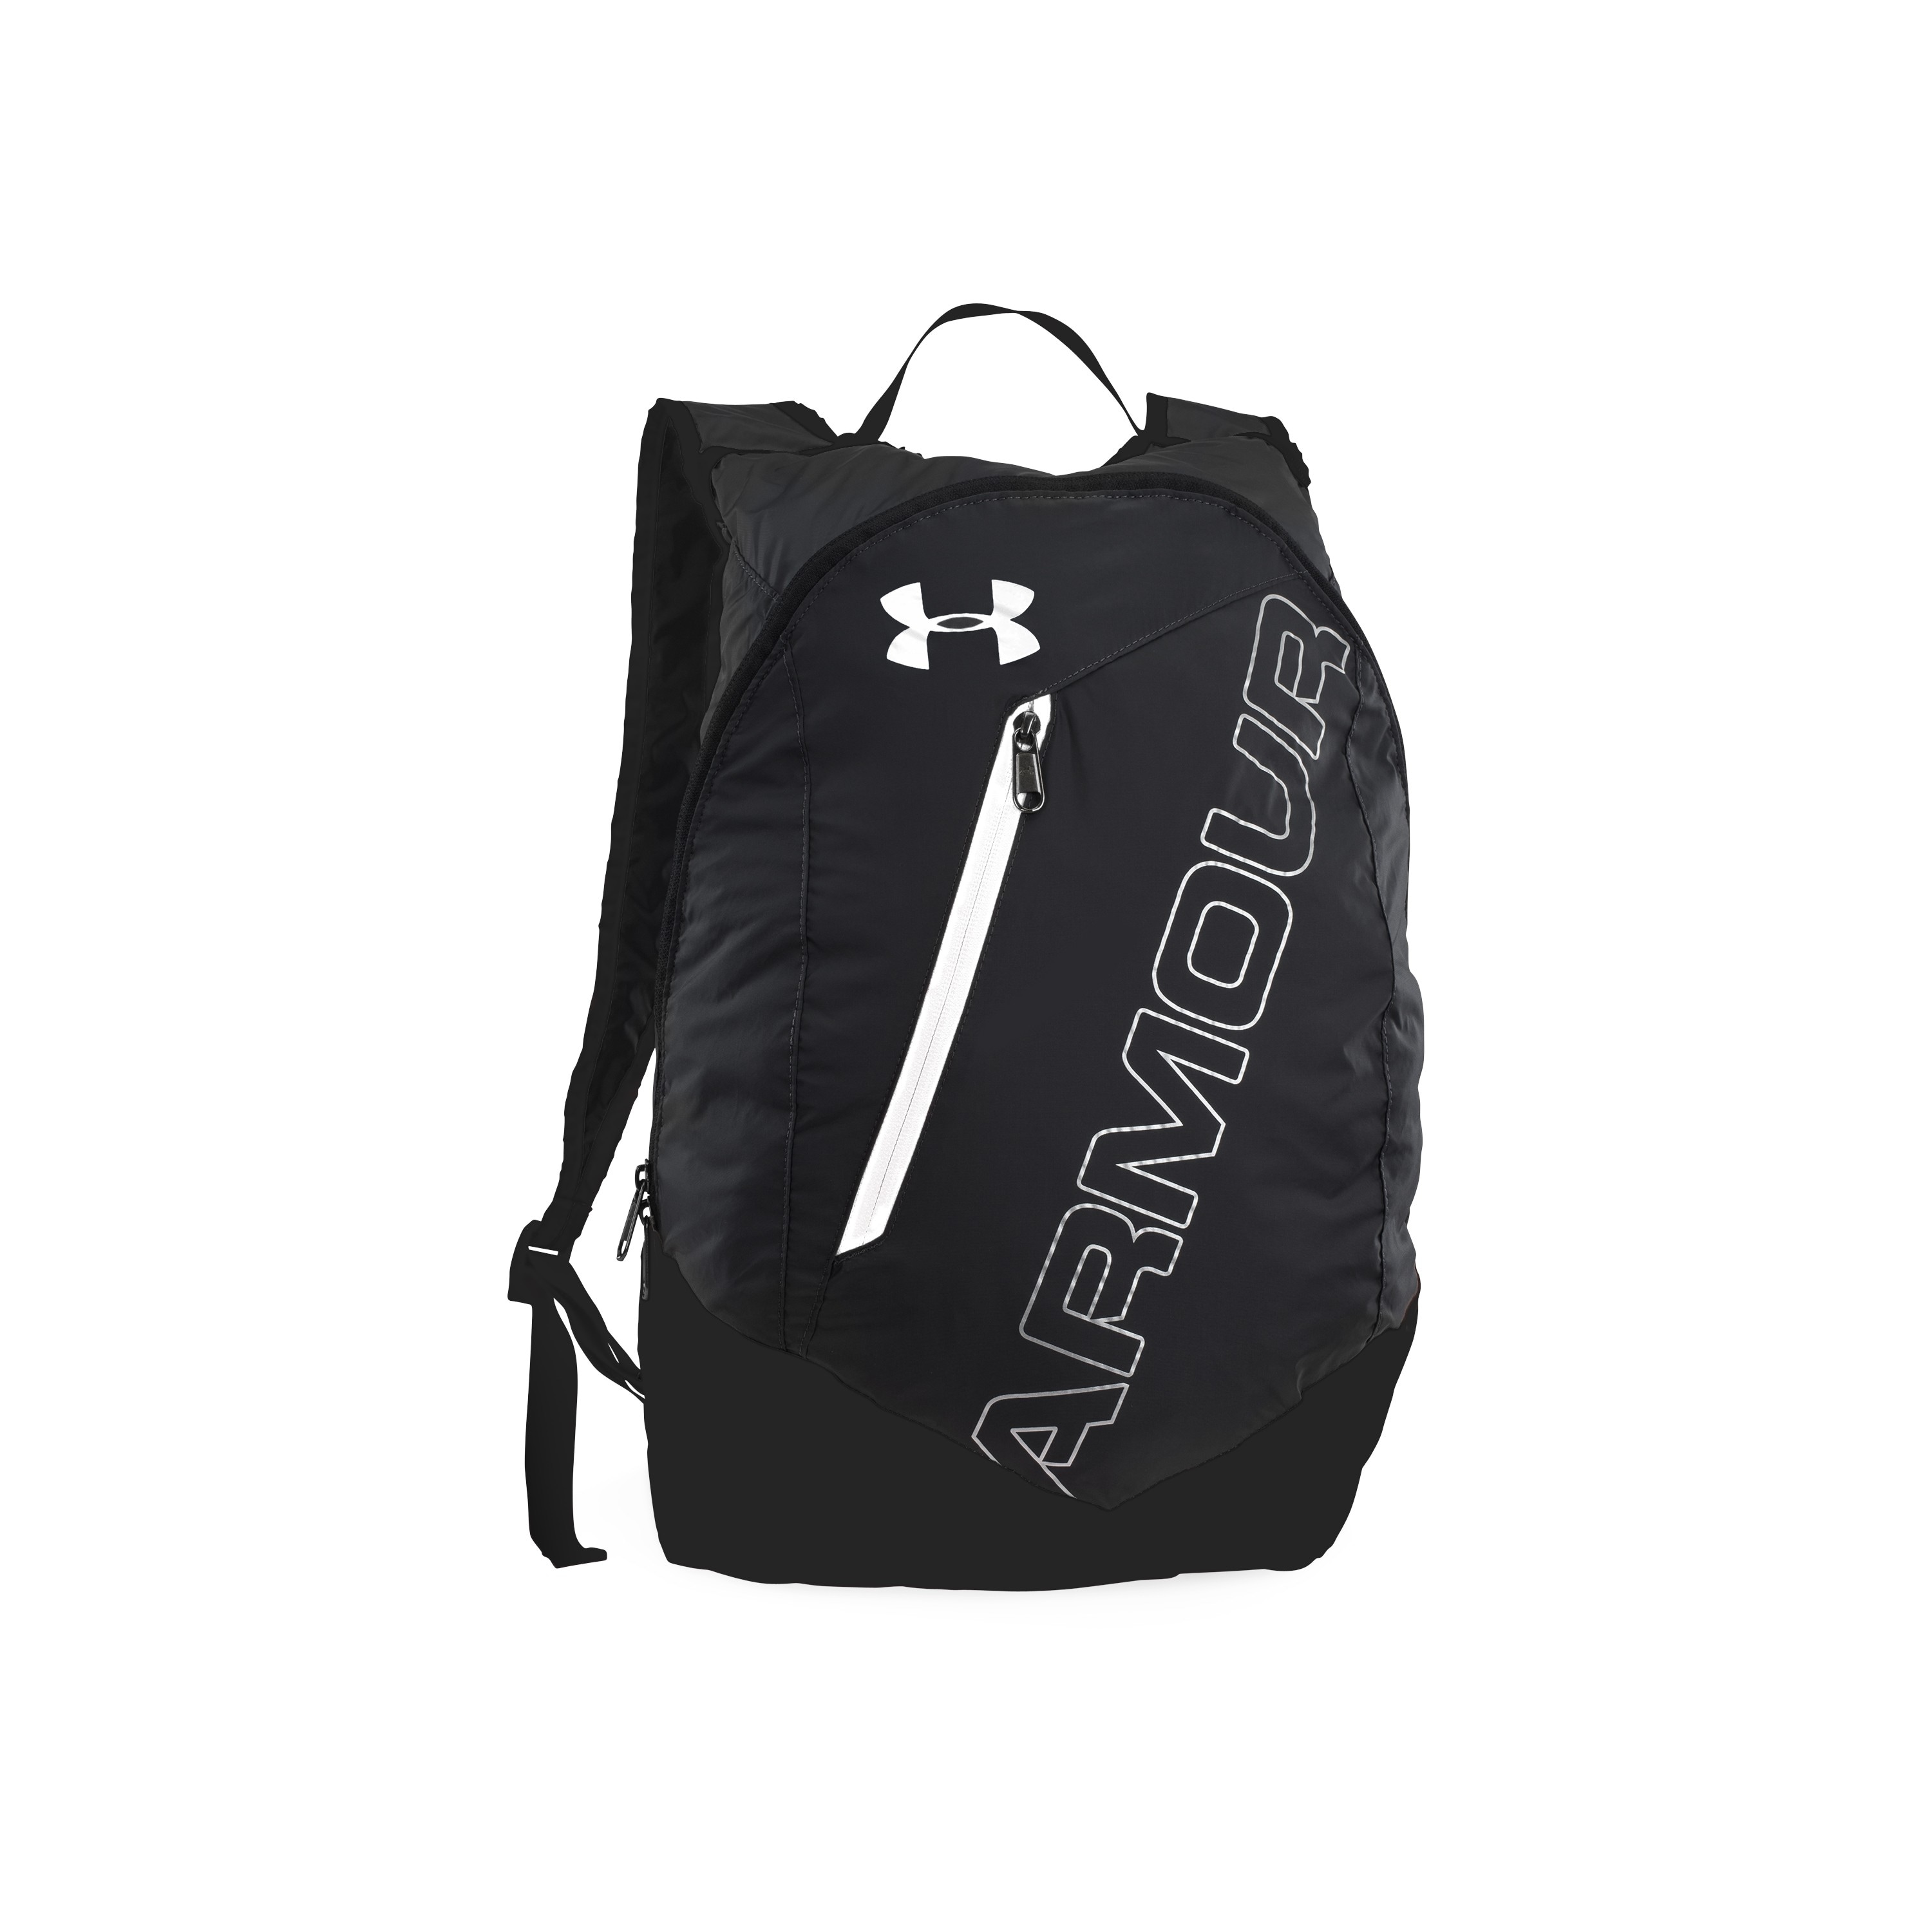 Under Armour Backpack Adaptable black 